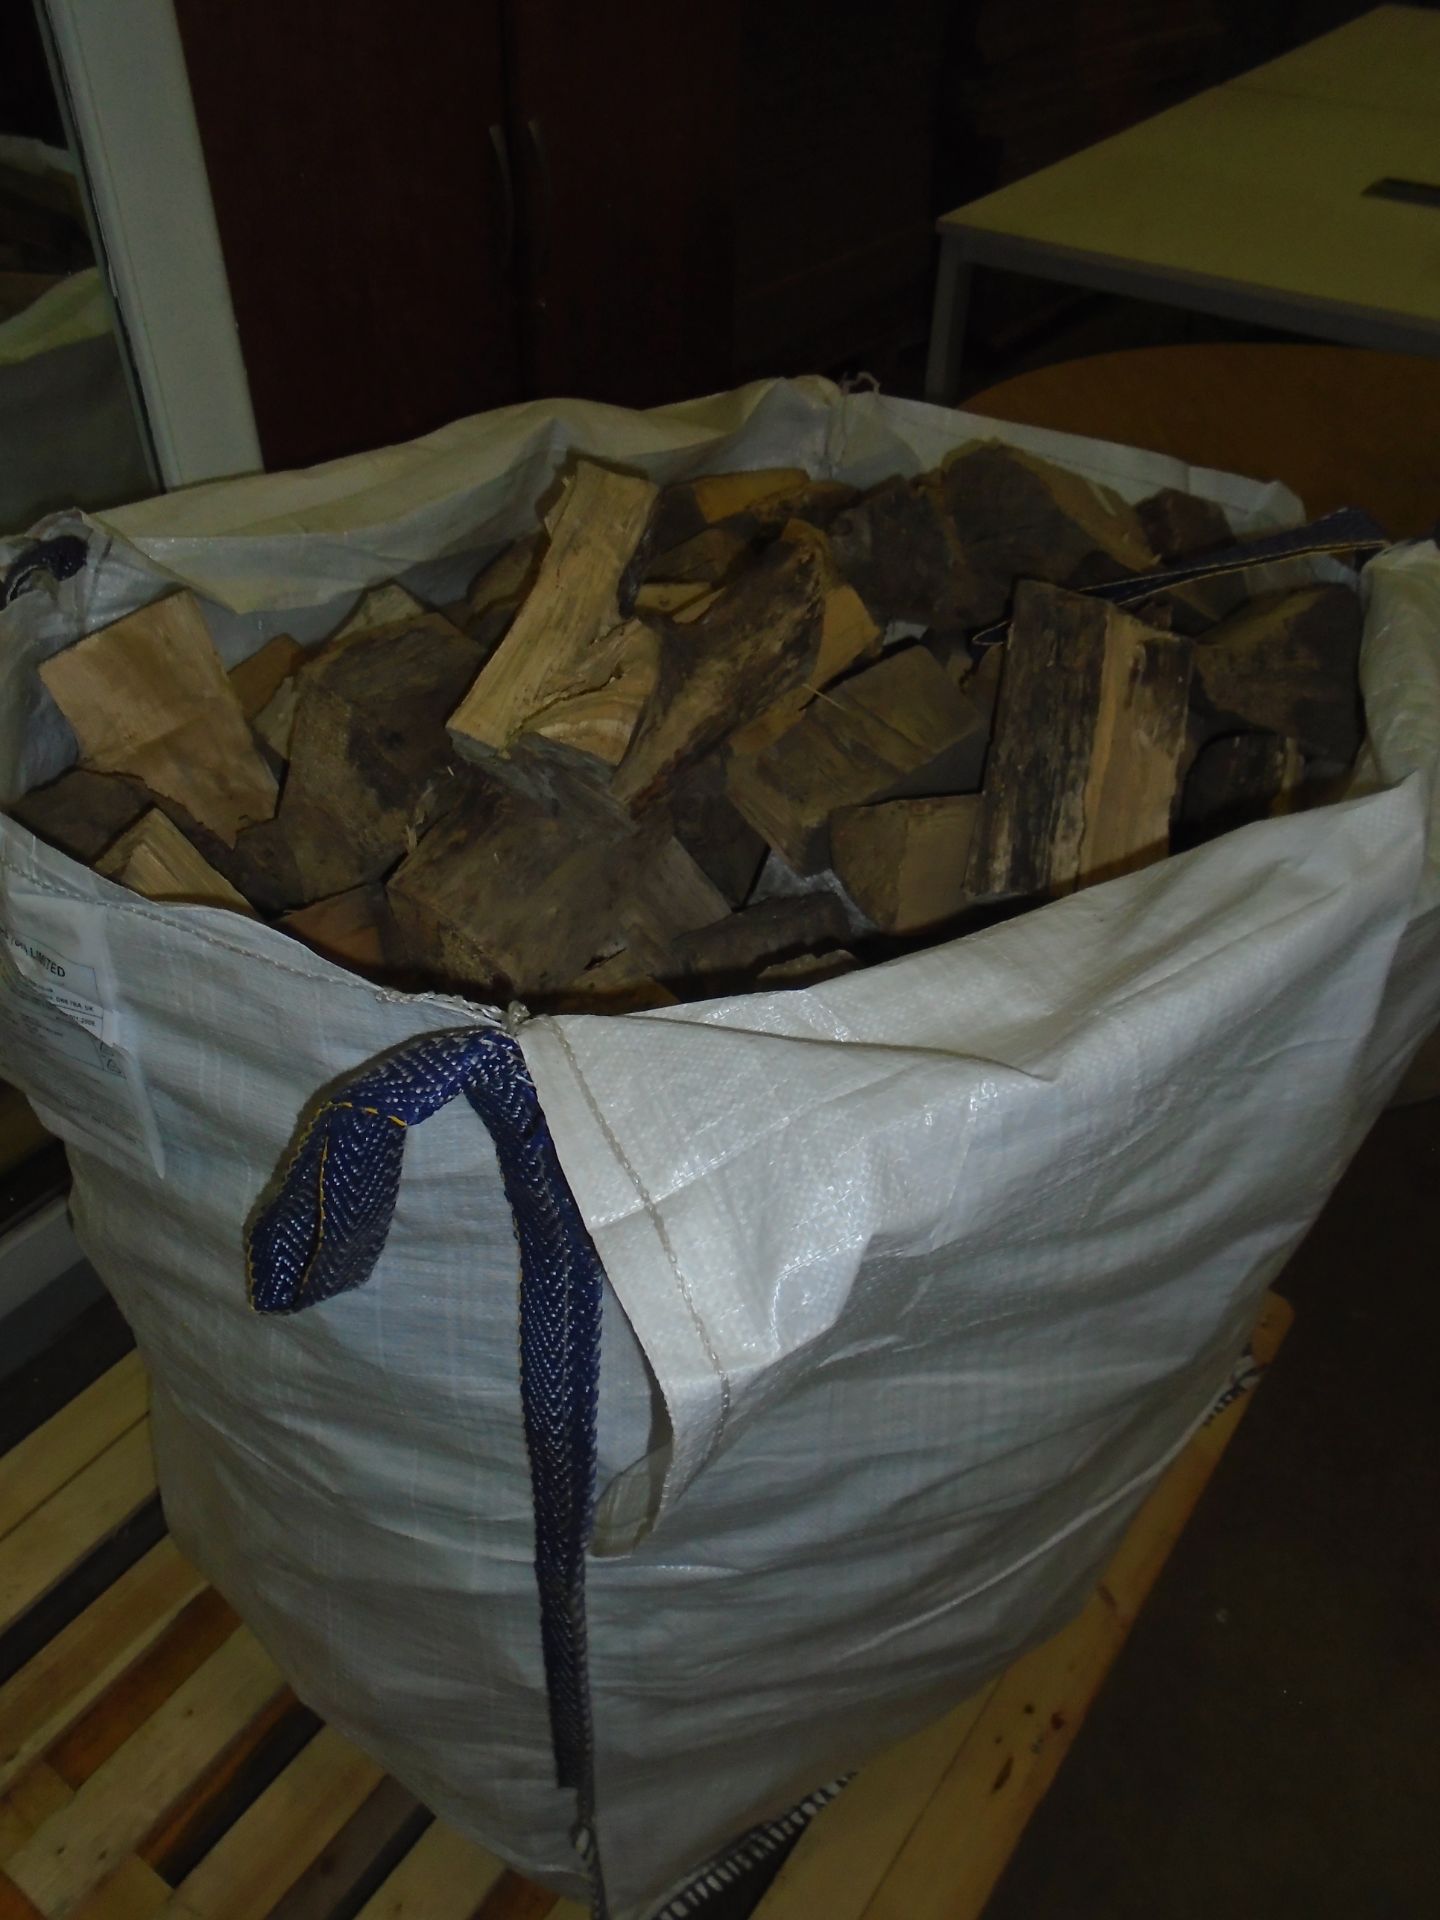 Contents to large sack - extra dry matured fire logs